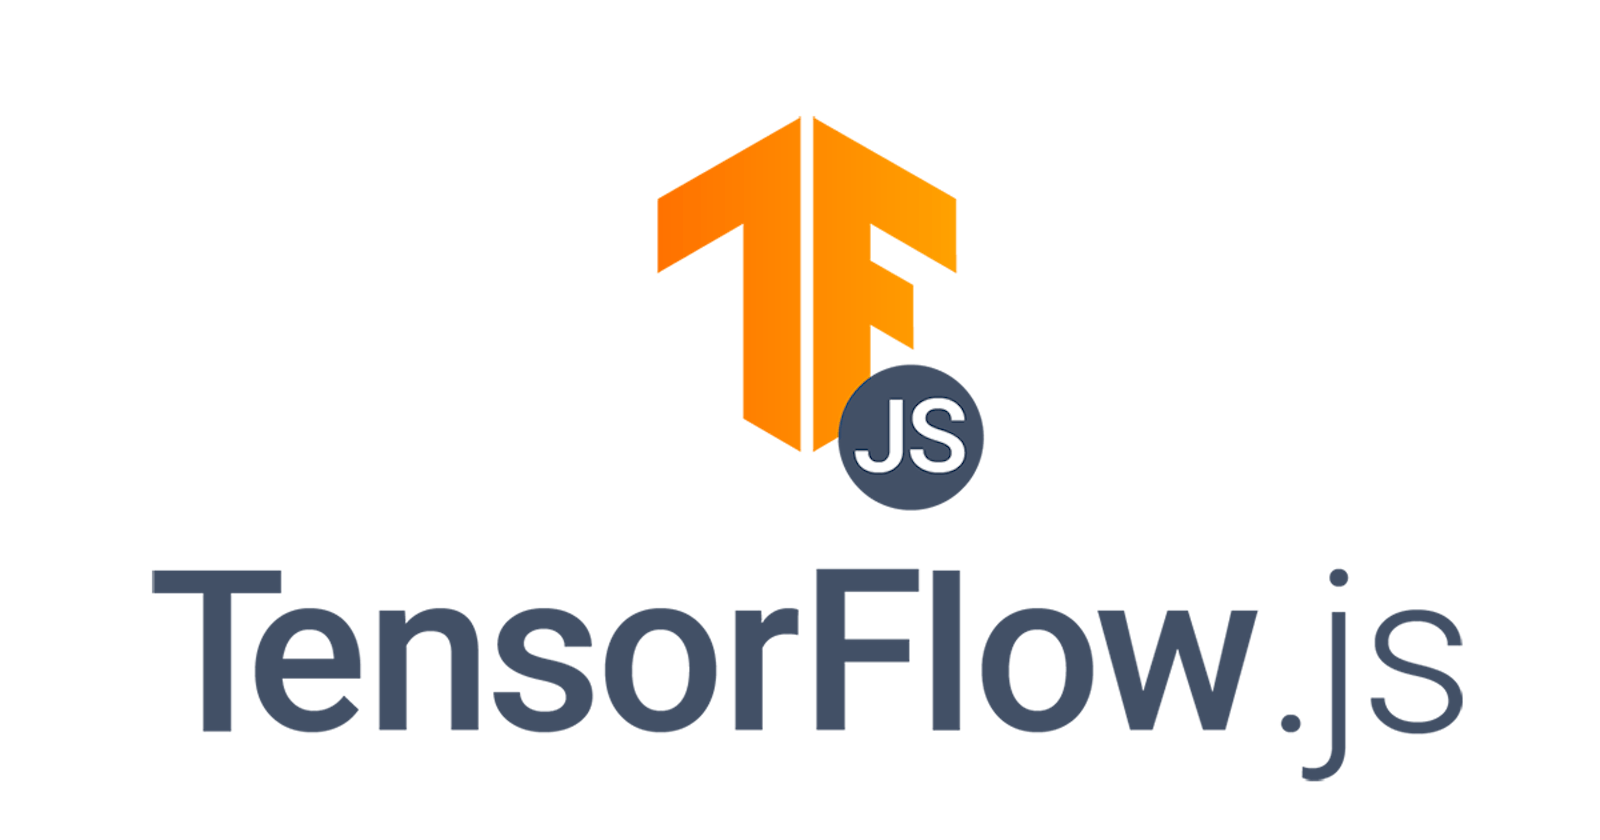 Diving into Machine learning with TensorflowJS and other perks of my Outreachy internship